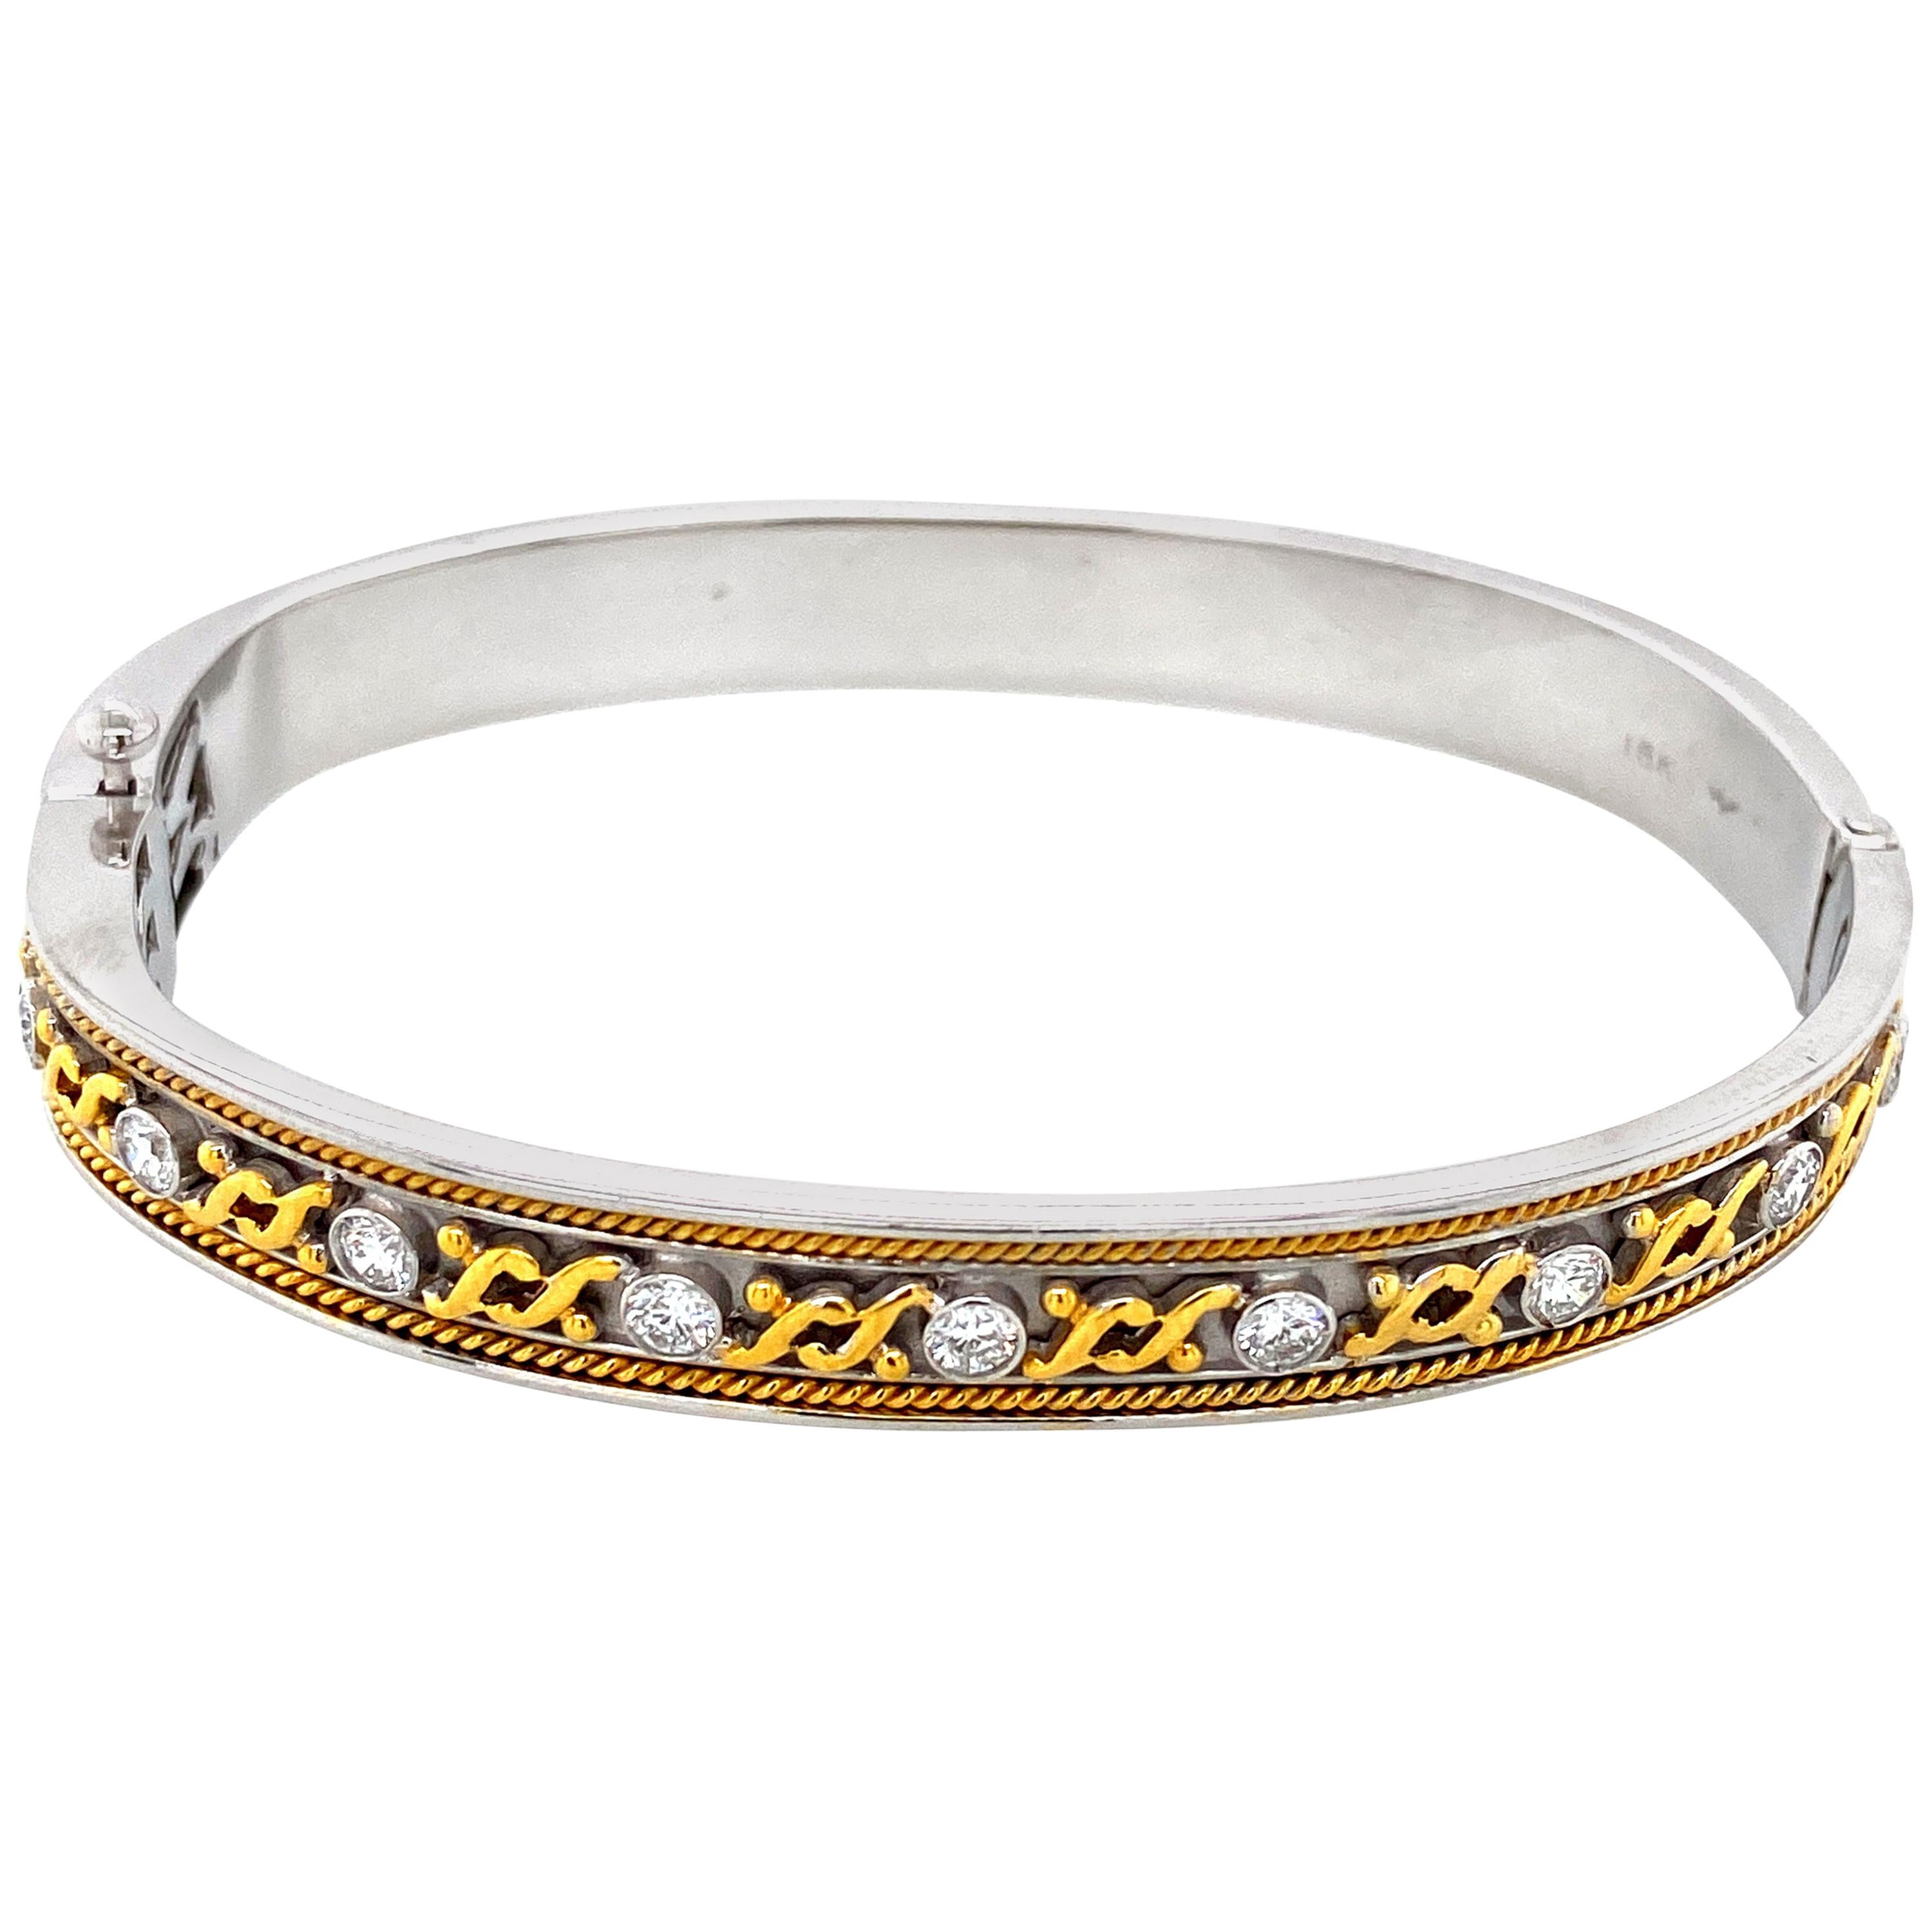 Diamond And Gold Bangle: 

An Art-Deco inspired Diamond and Gold Bracelet, with detailed craftsmanship to make sure the bracelet stands out! It is seldom that one sees gold detailing in such finesse as done on this bracelet, truly magnificent. The